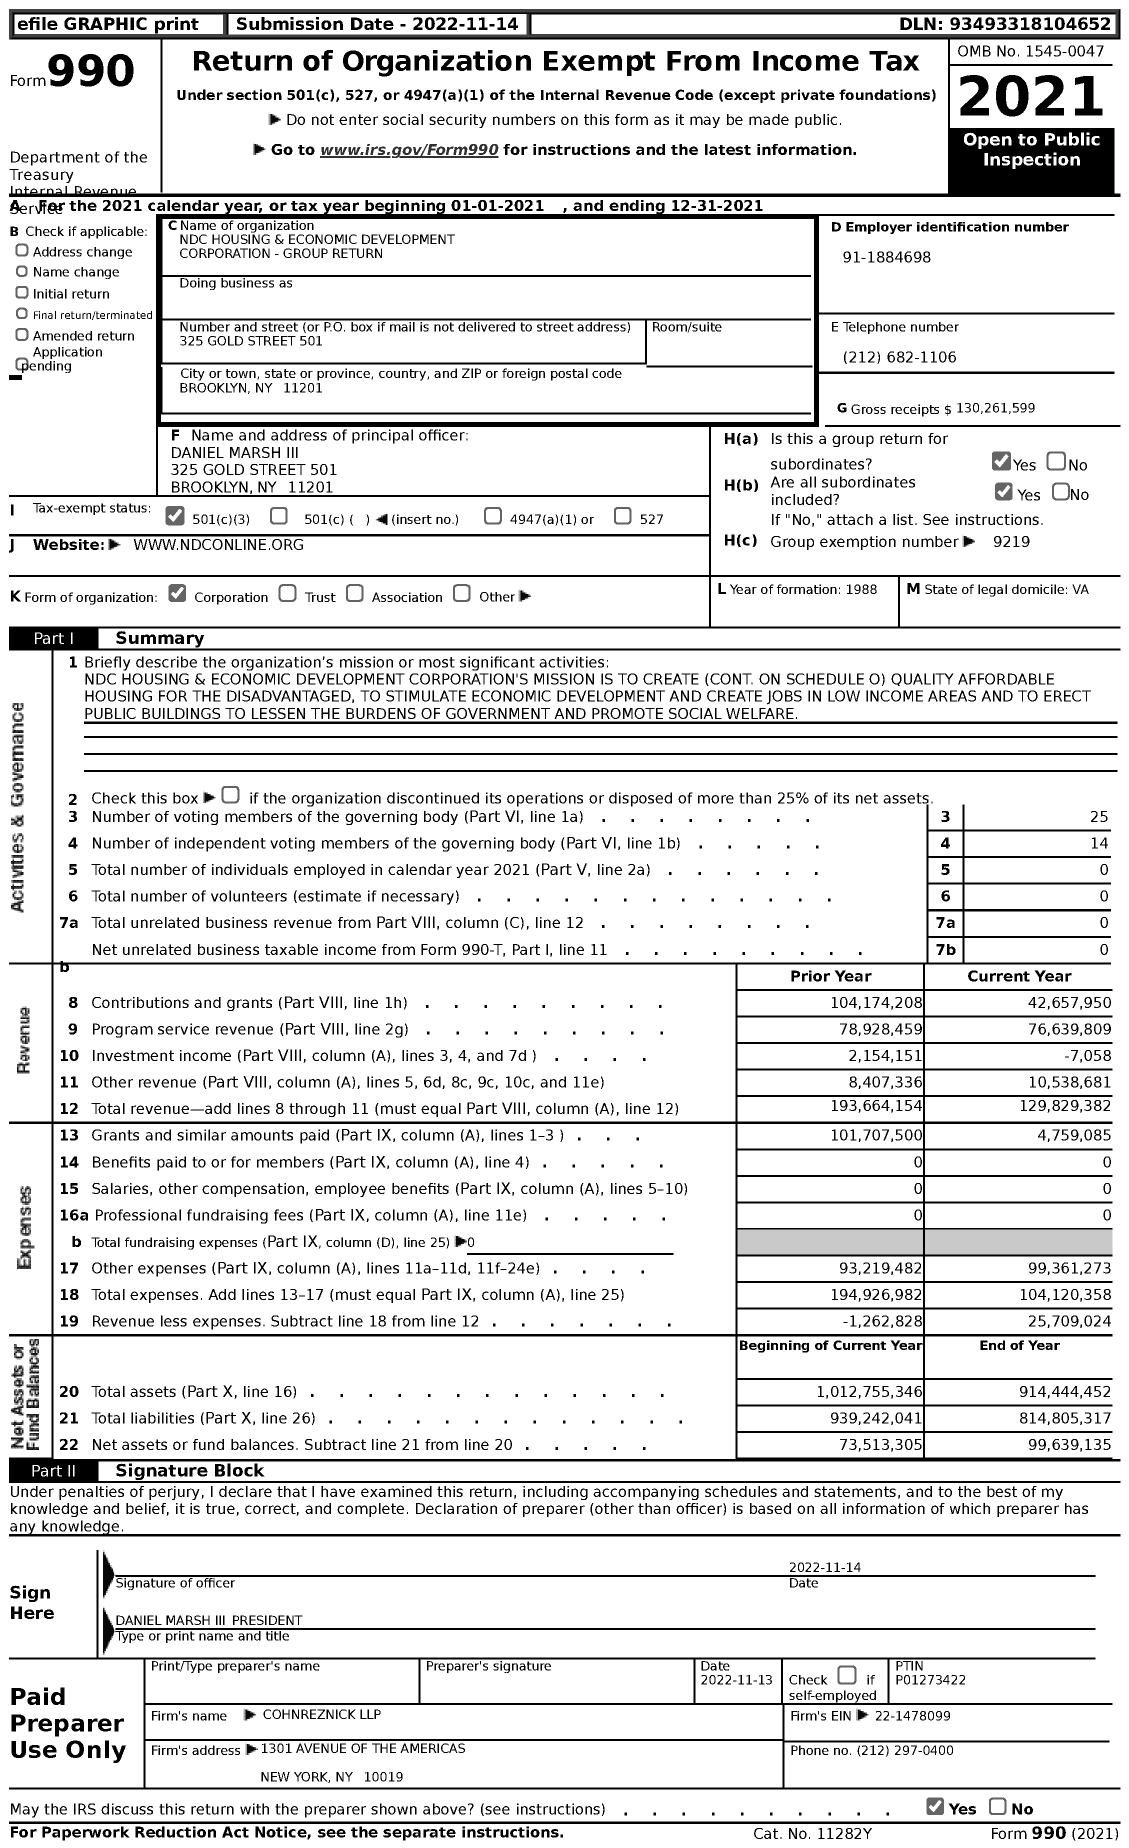 Image of first page of 2021 Form 990 for NDC Housing and Economic Development Corporation - Group Return